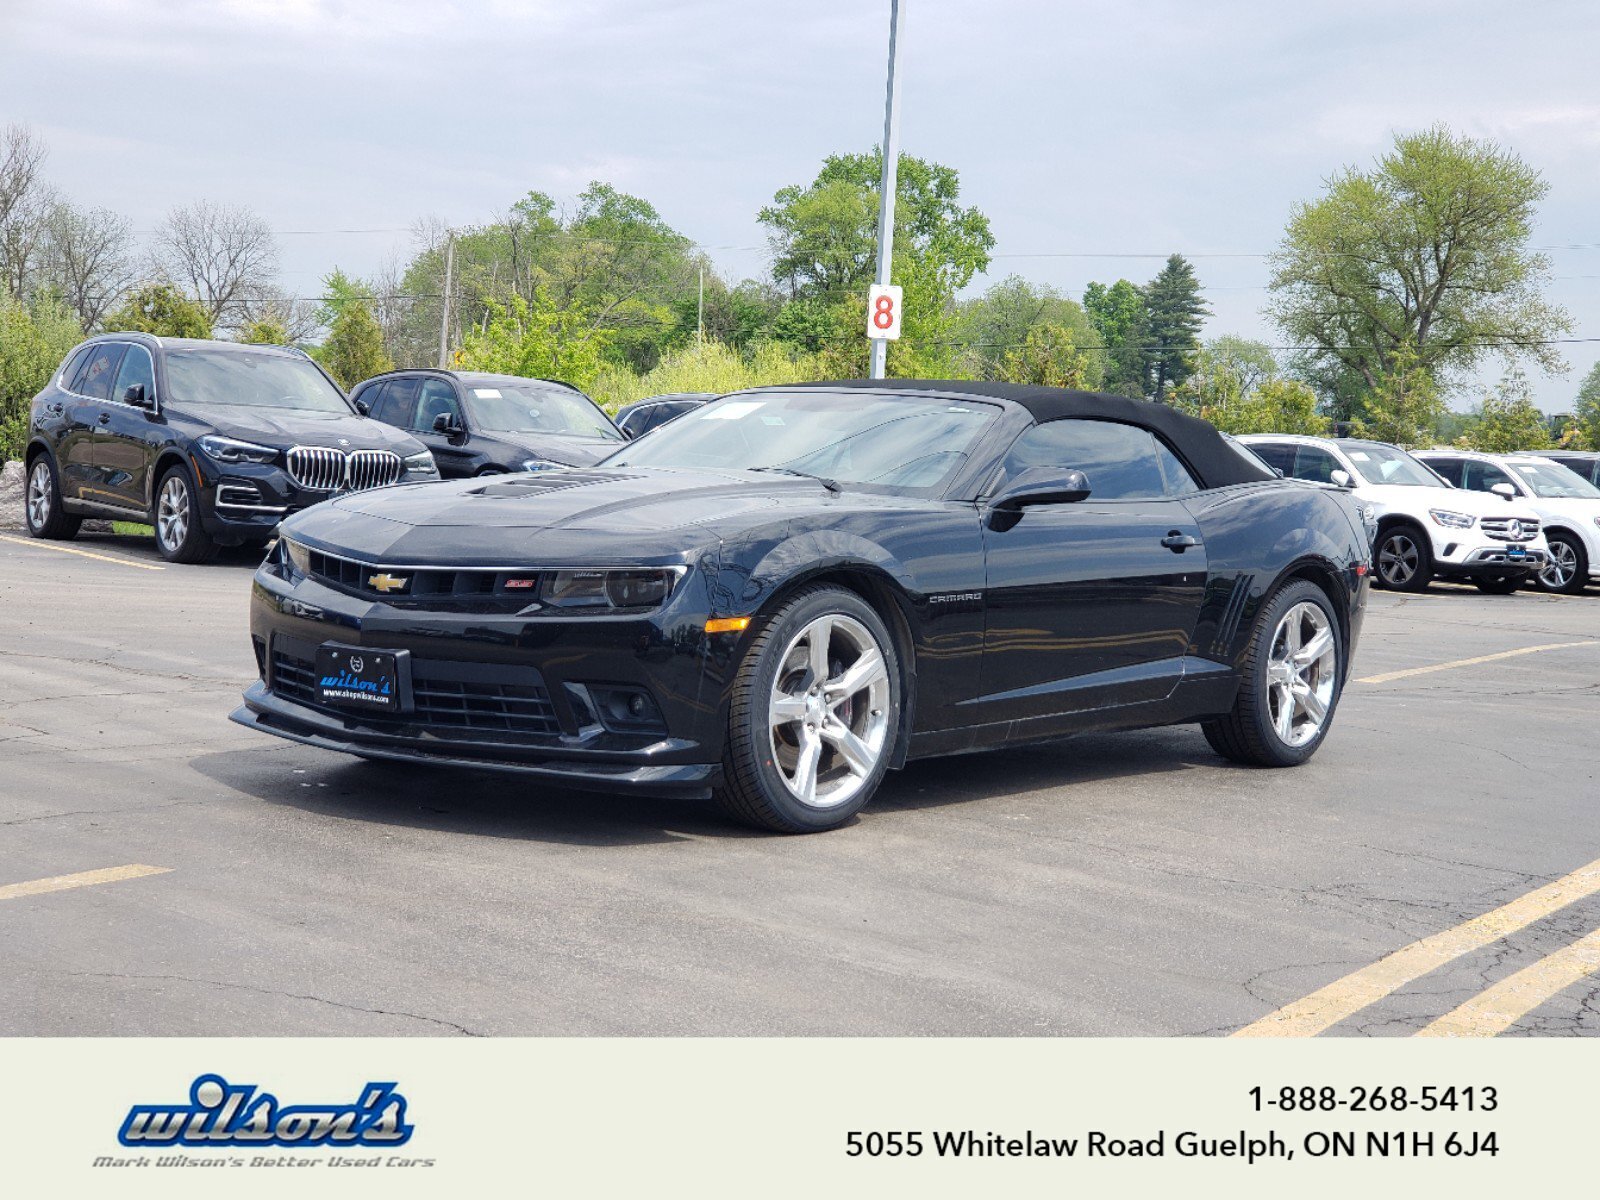 2015 Chevrolet Camaro SS Convertible, V8, RS, Leather, Nav, Head-Up Disp